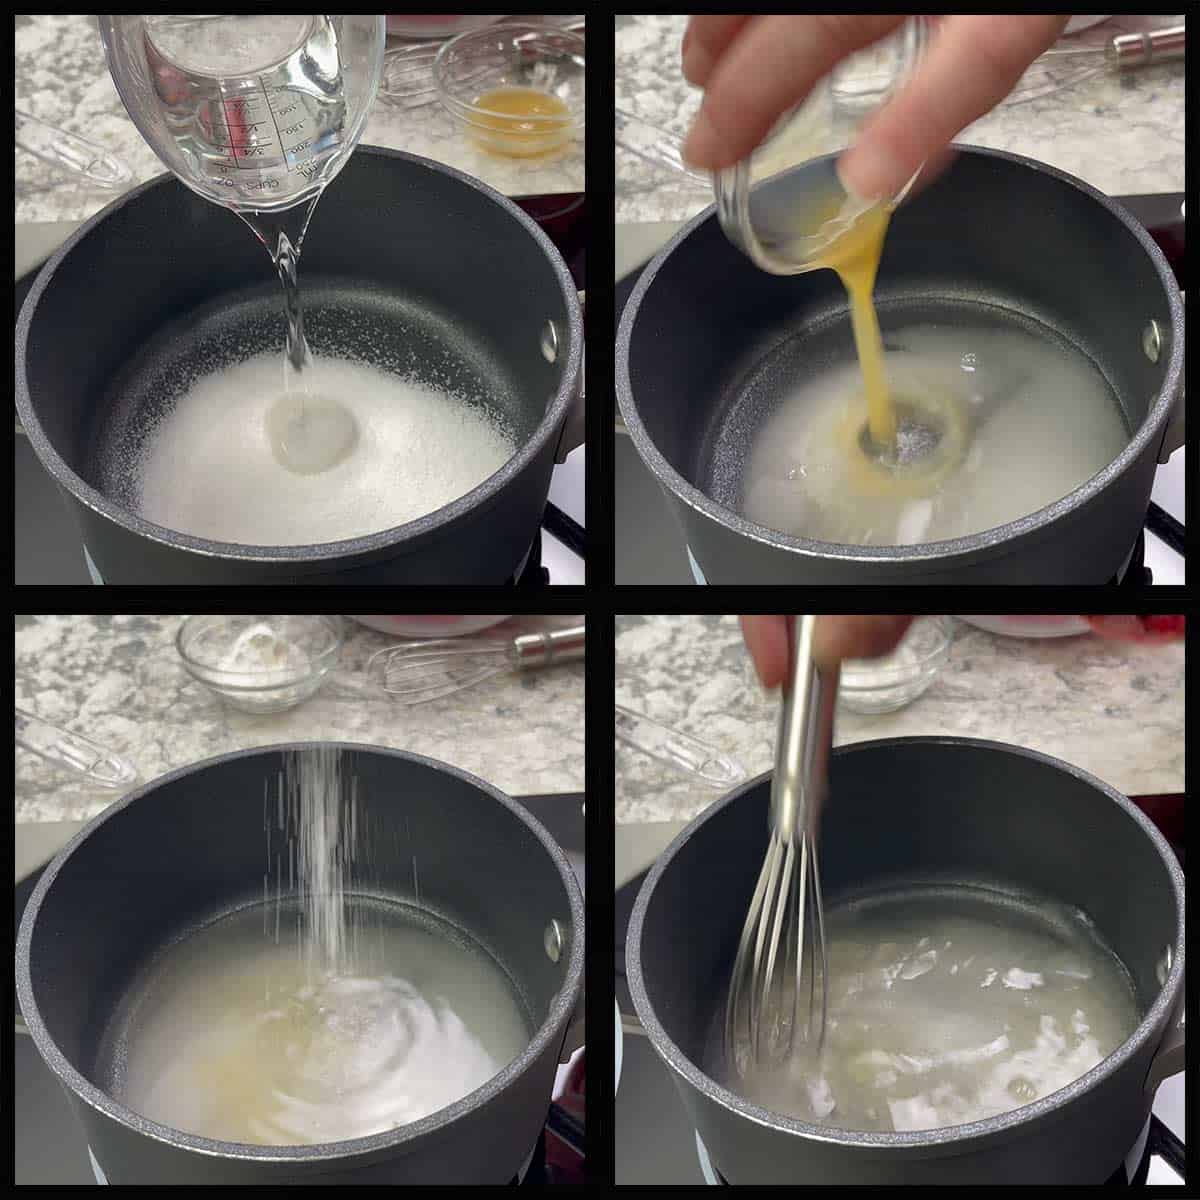 heating the sugar, water, lemon juice, and salt in a small saucepan on the stove.